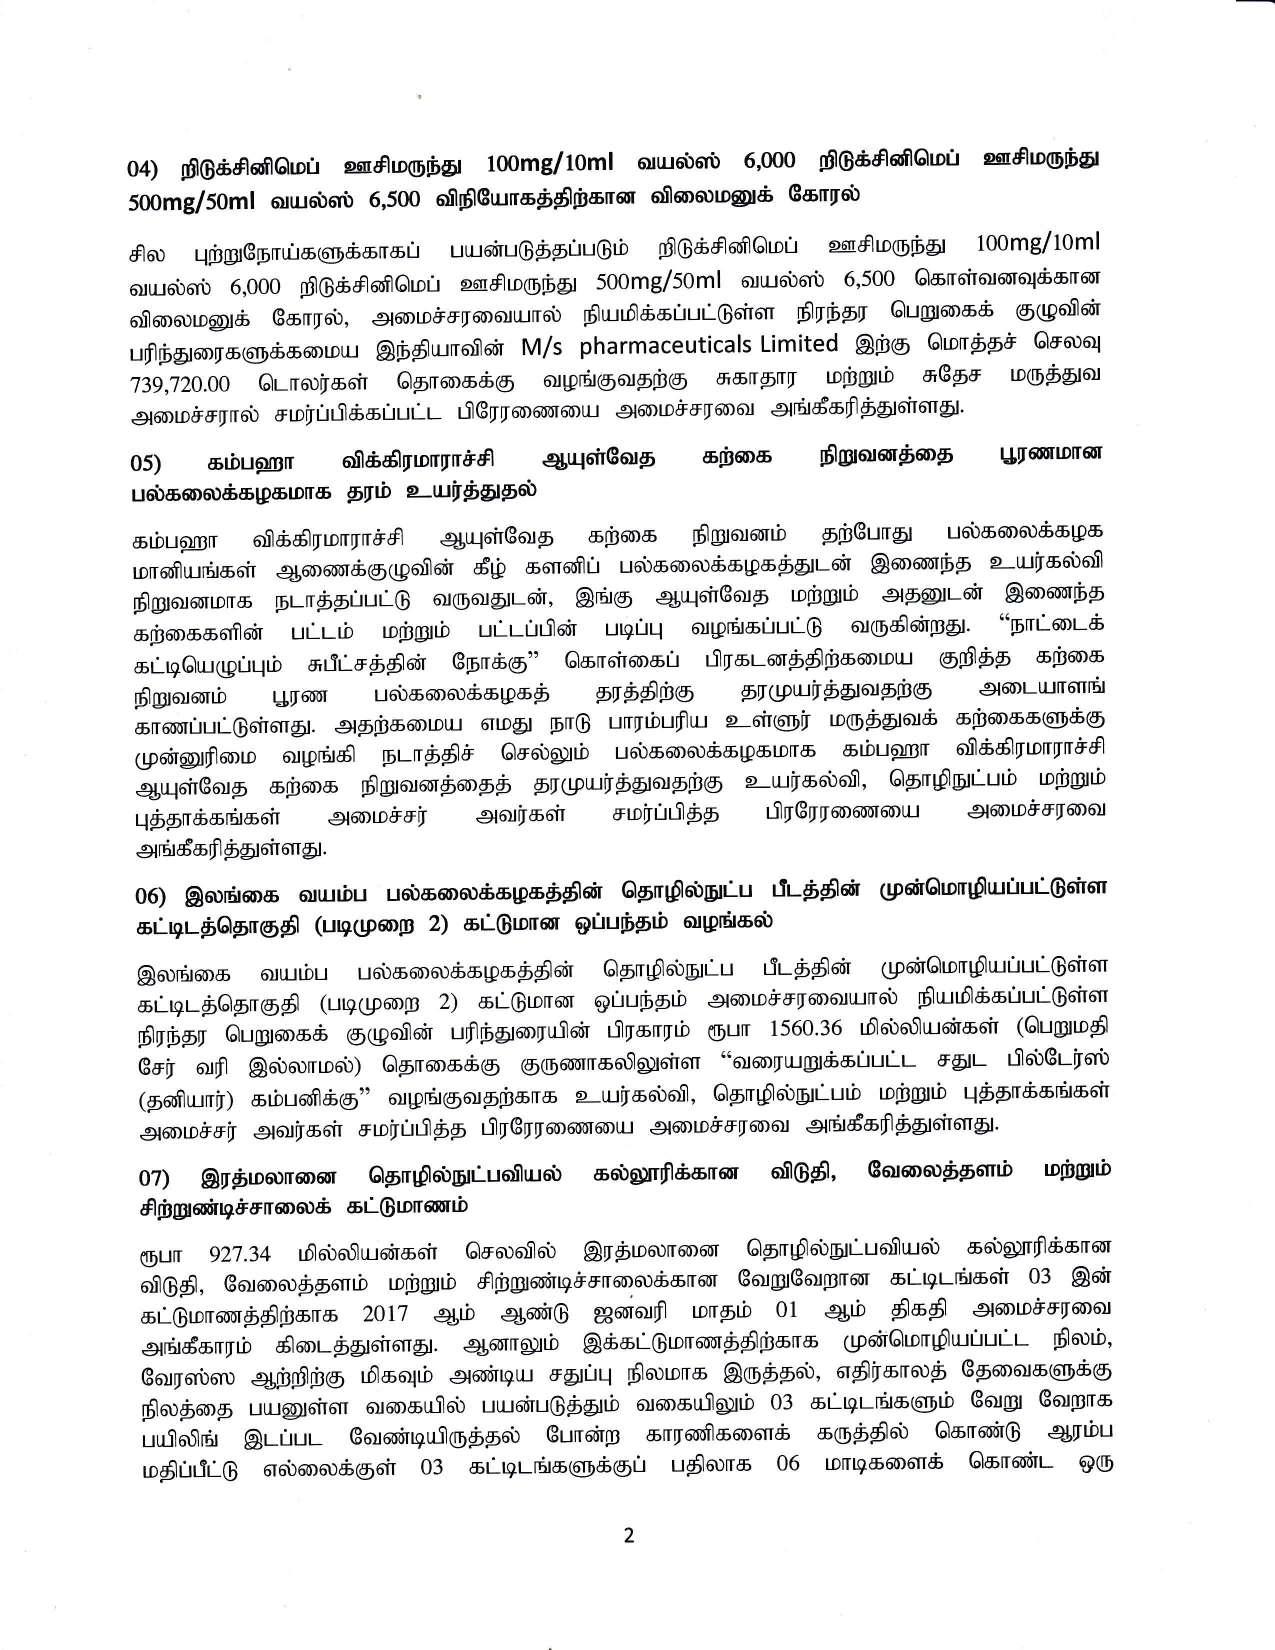 Cabinet Decision on 08.07.2020 TAMIL page 002